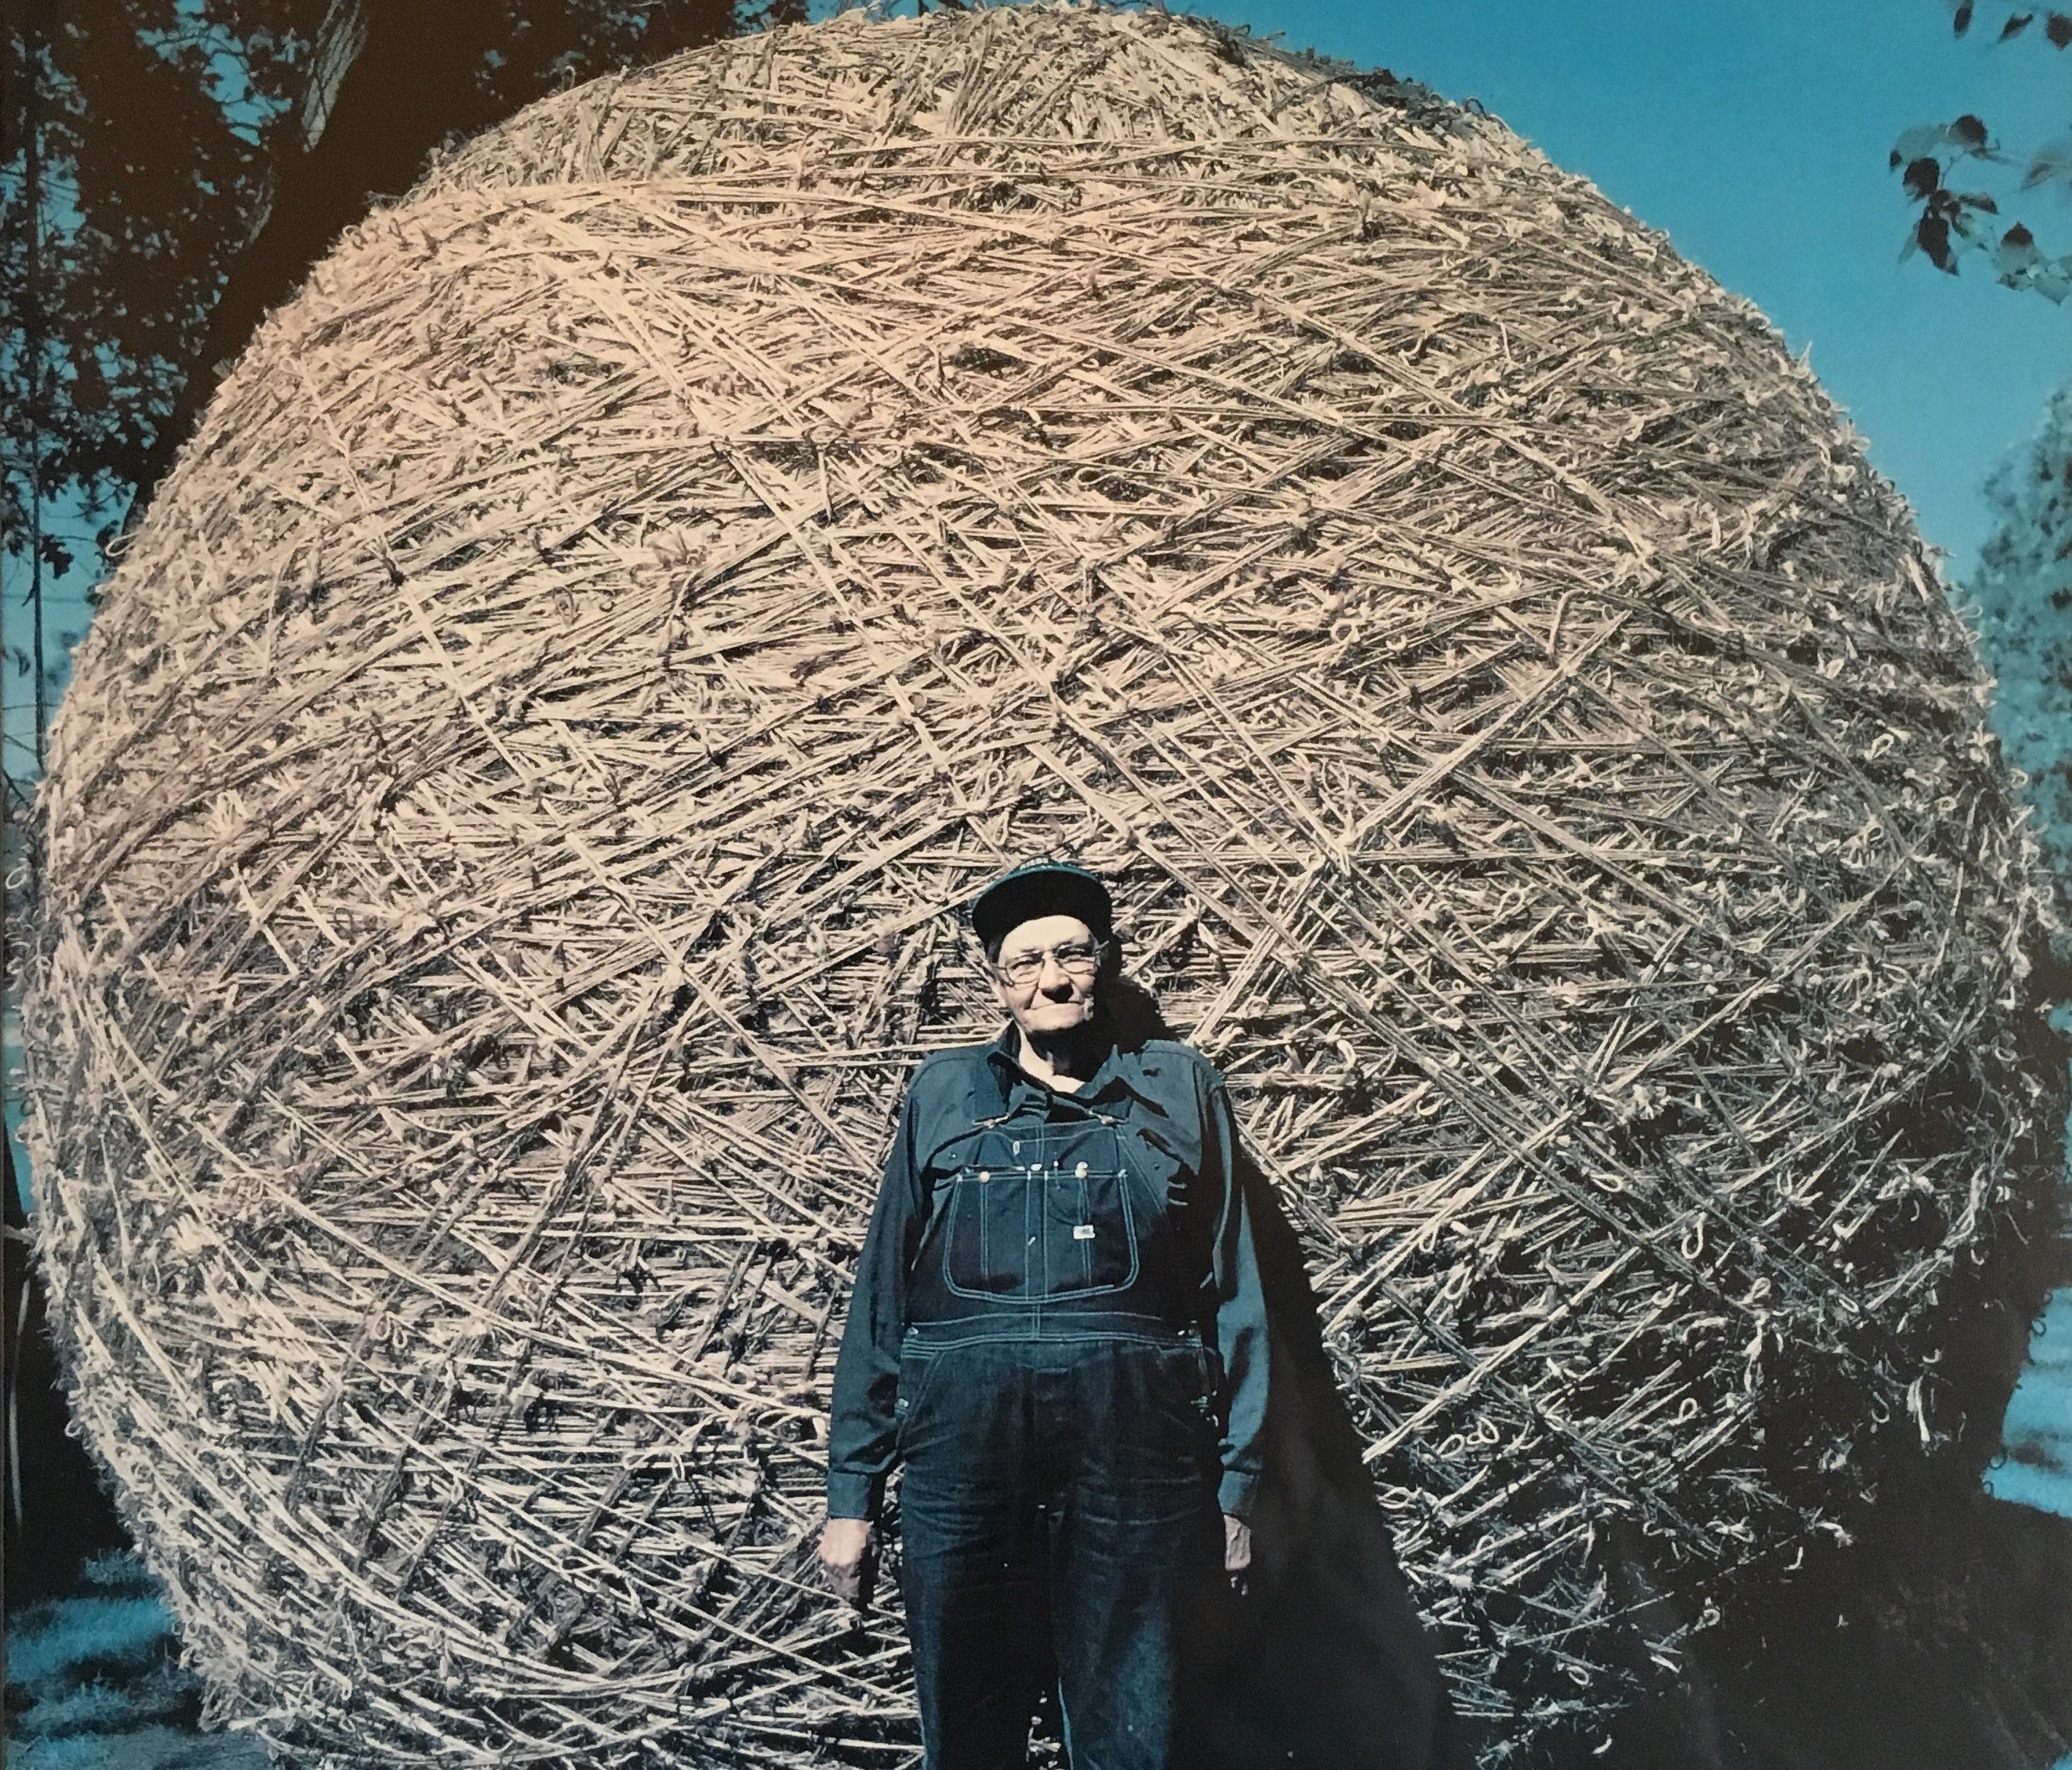 Over the course of his life, Francis Johnson rolled what is now known as the largest ball of twine rolled by one man.